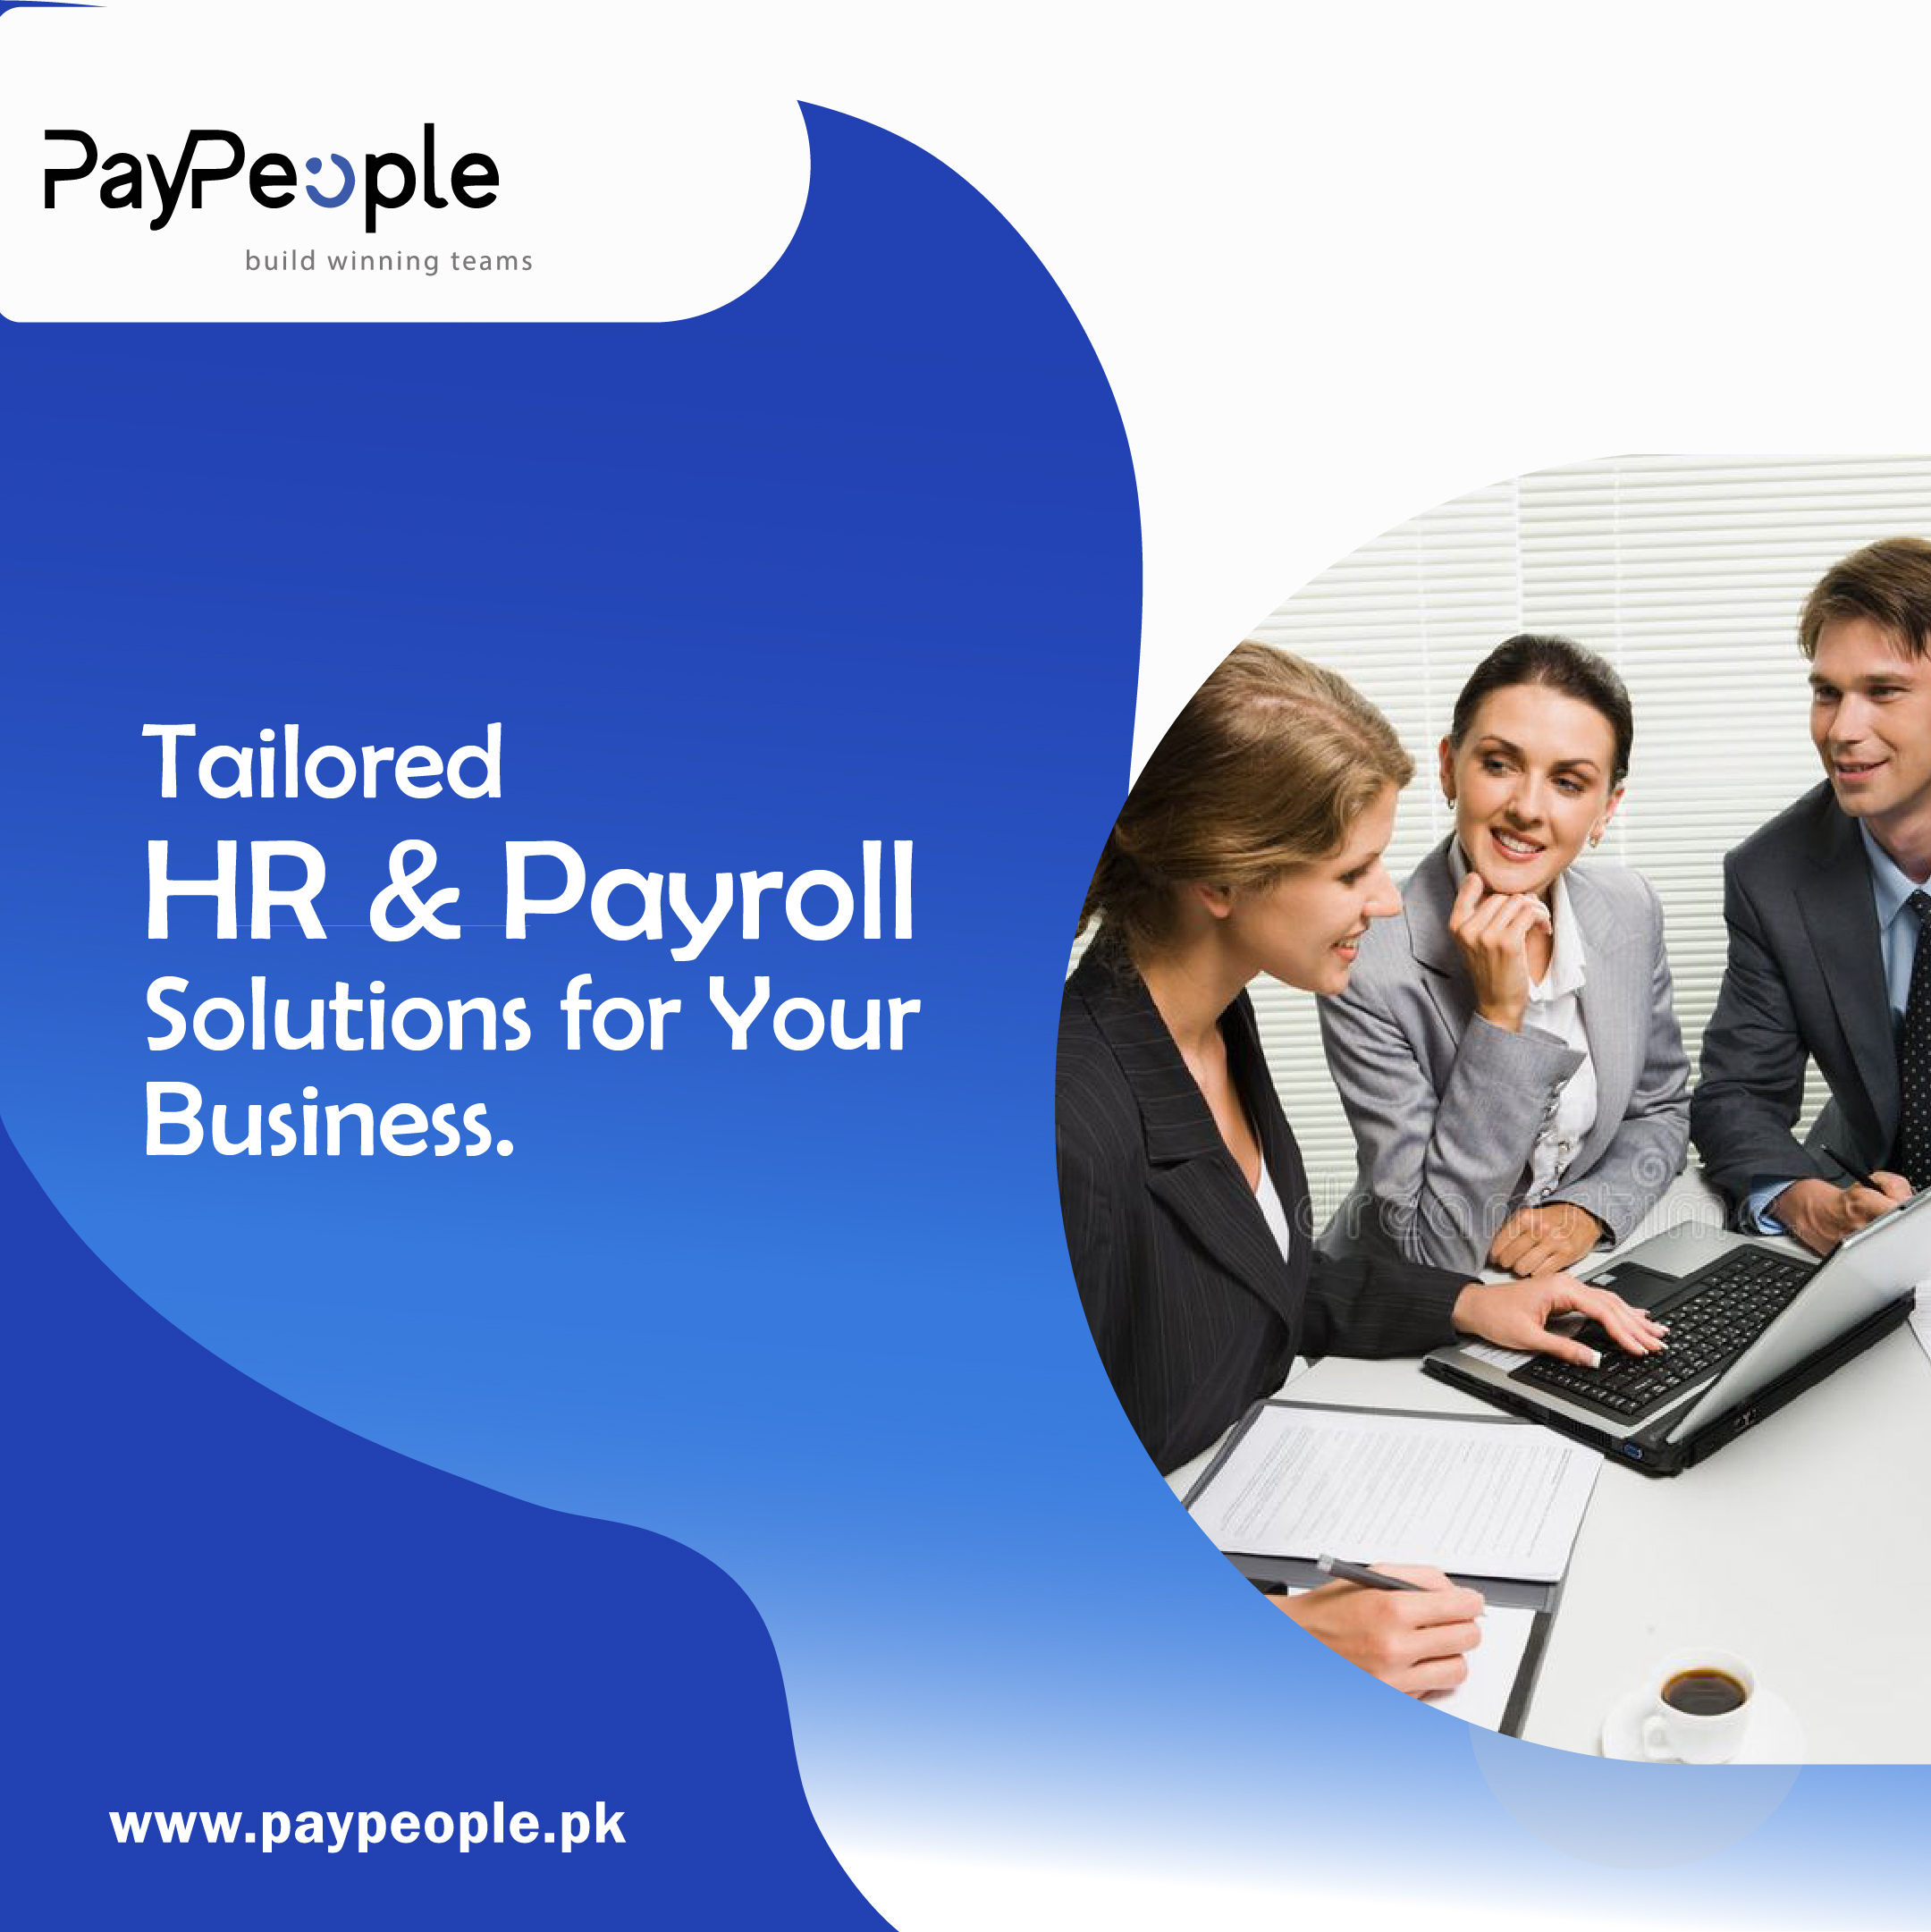 How are deductions and benefits handled in Payroll Management?